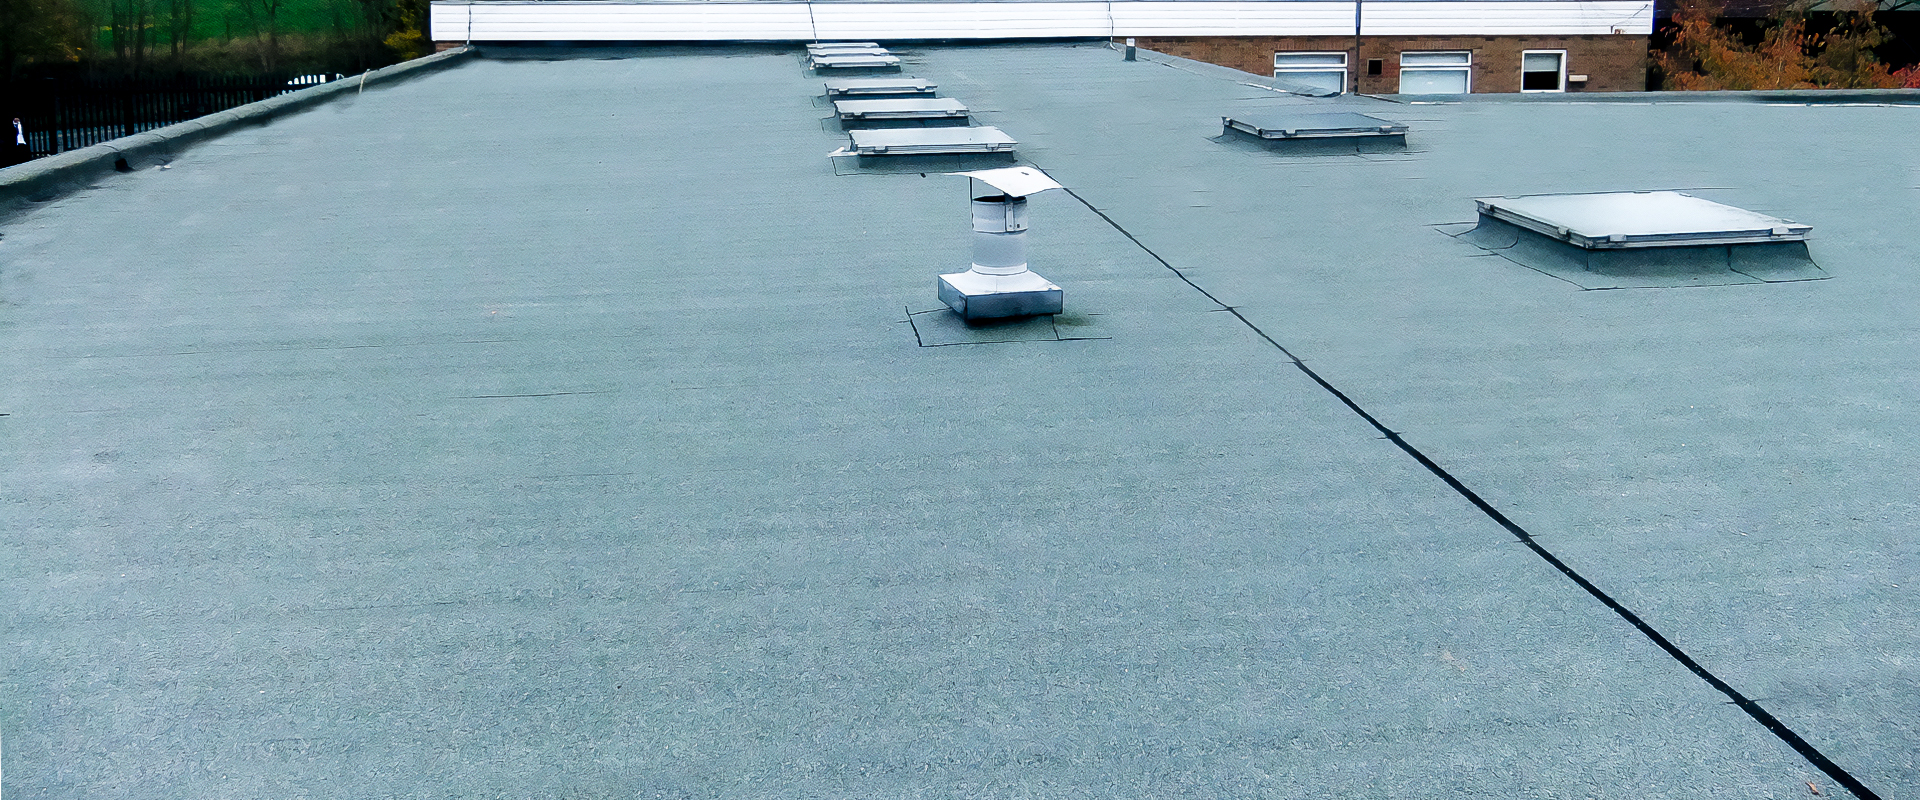 Image of Roof Completed by Newbury Roofing. Domestic & Commercial Roofing Contractor.